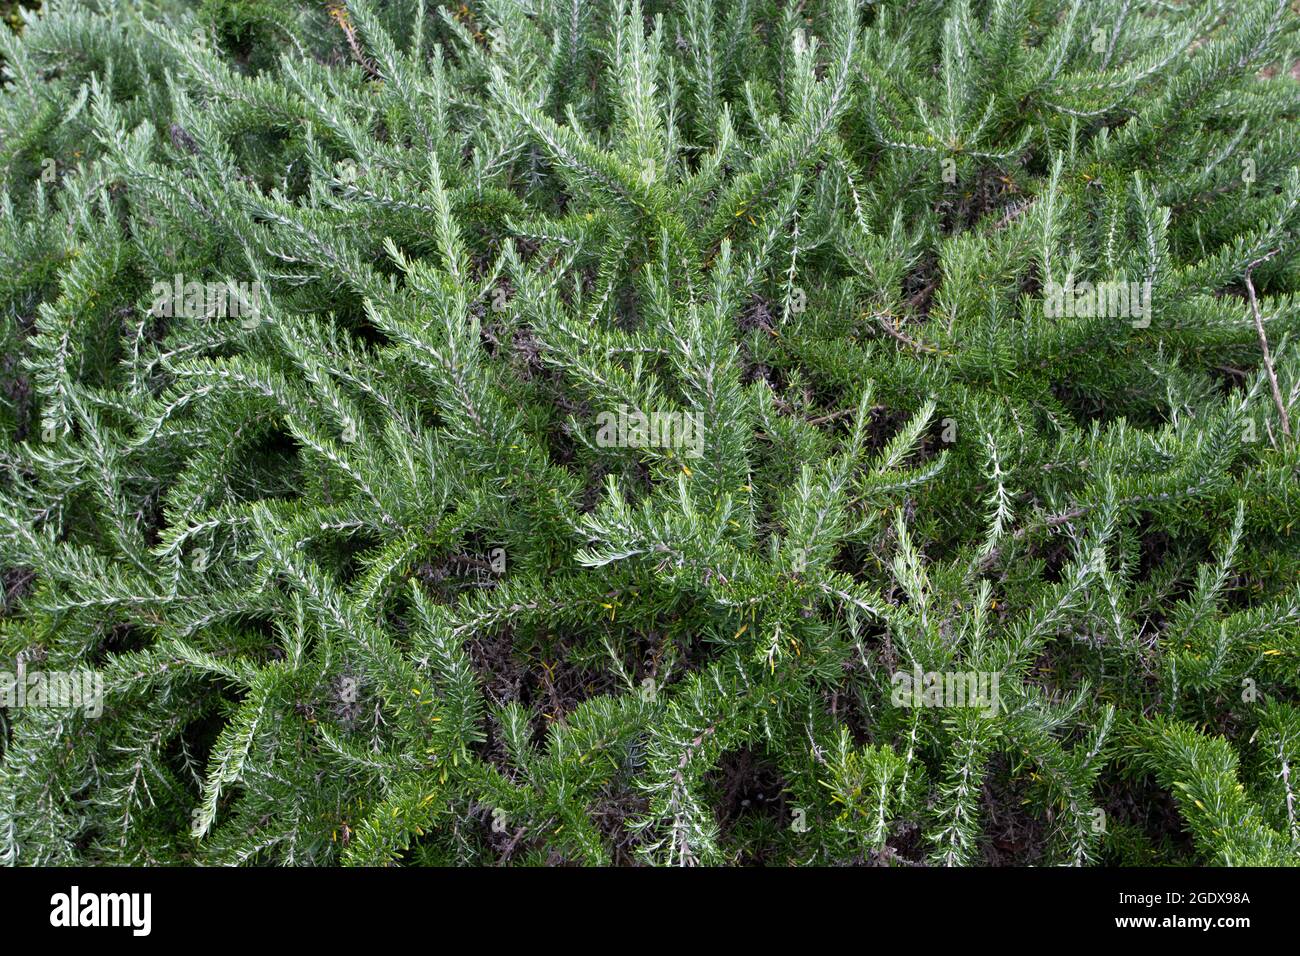 Rosemary twisted branches with fragrant, evergreen, needle-like leaves. Salvia rosmarinus plant. Stock Photo